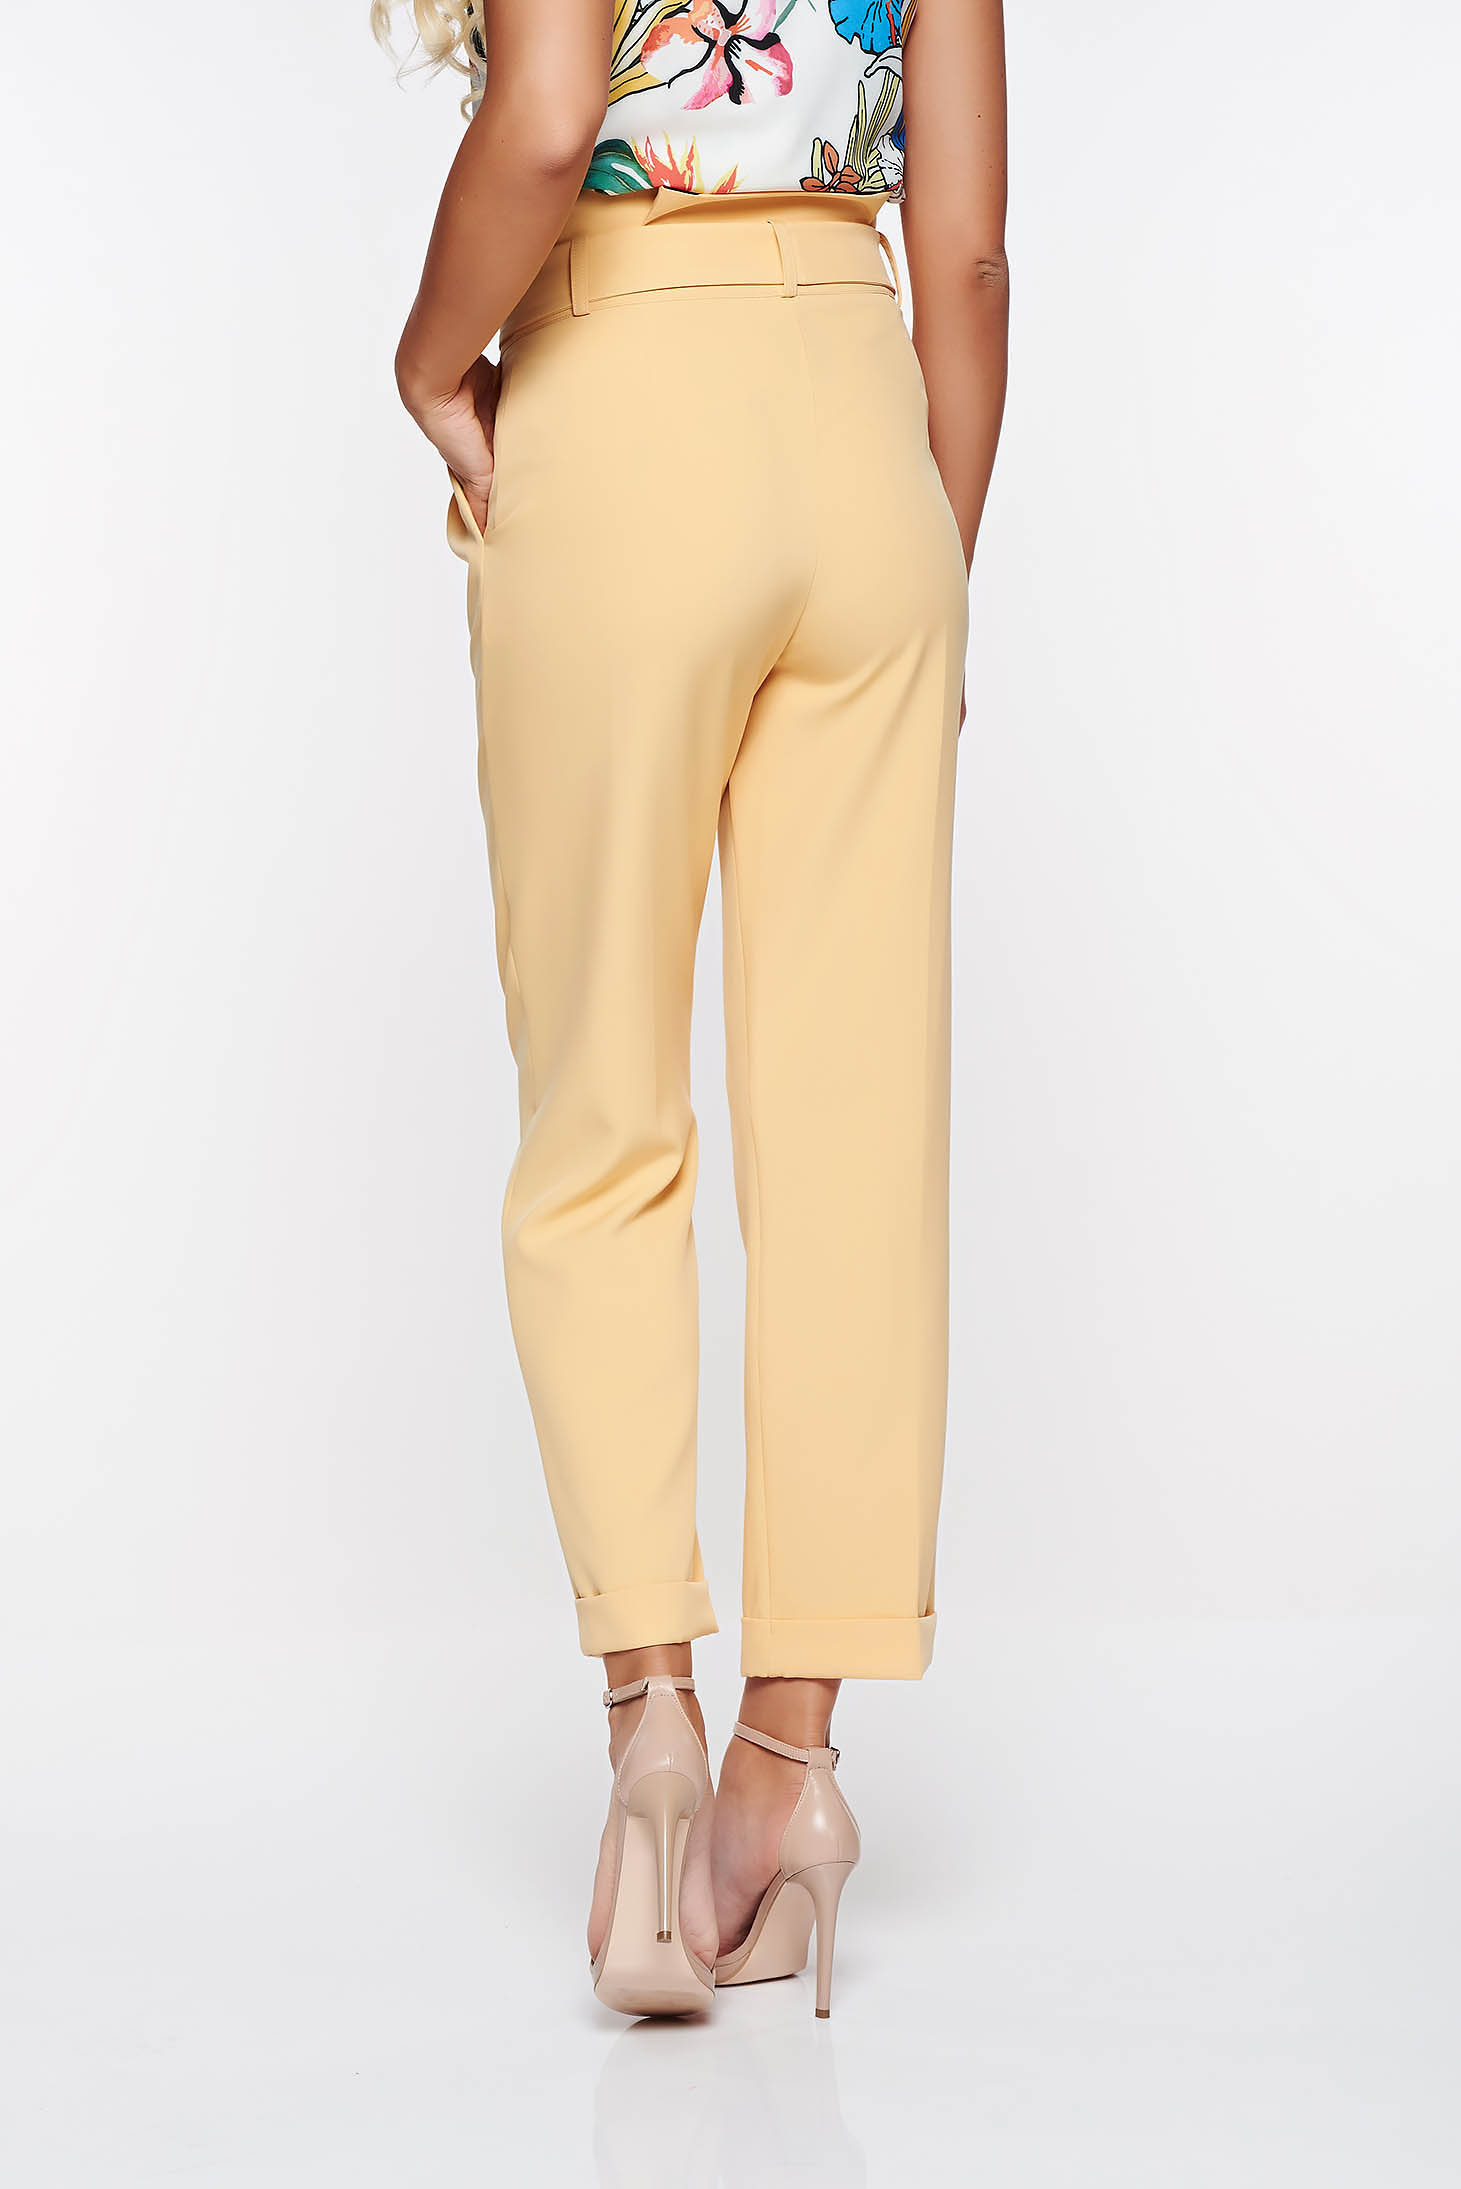 PrettyGirl yellow high waisted office trousers slightly elastic fabric with pockets 2 - StarShinerS.com